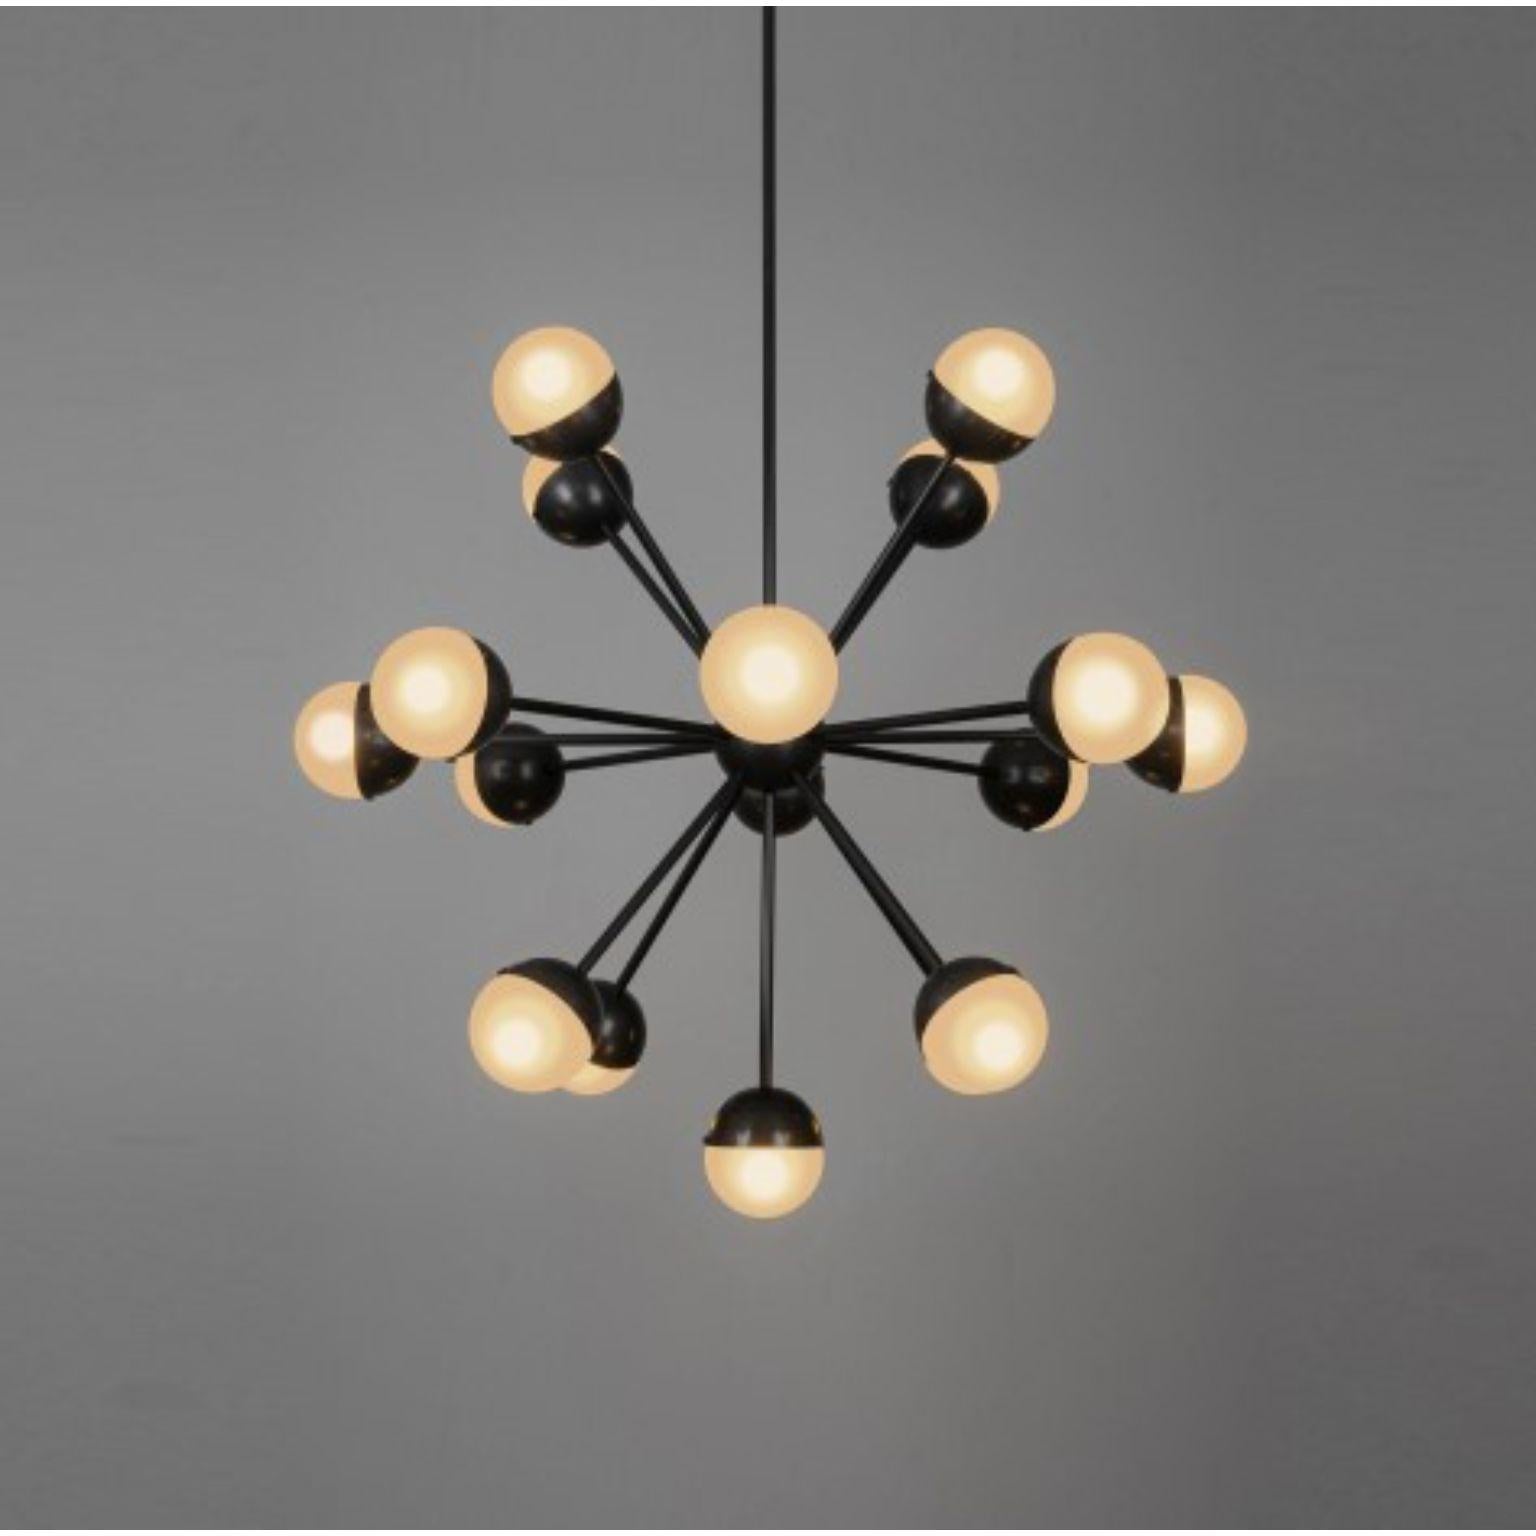 Molecule spark round 17 chandelier by Schwung
Dimensions: D97.9 x H 191.4 cm
Materials: Brass, Opal glass
Weight: 14.2 kg

Finishes available: Black gunmetal, polished nickel, brass
Other sizes available.

 Schwung is a german word, and